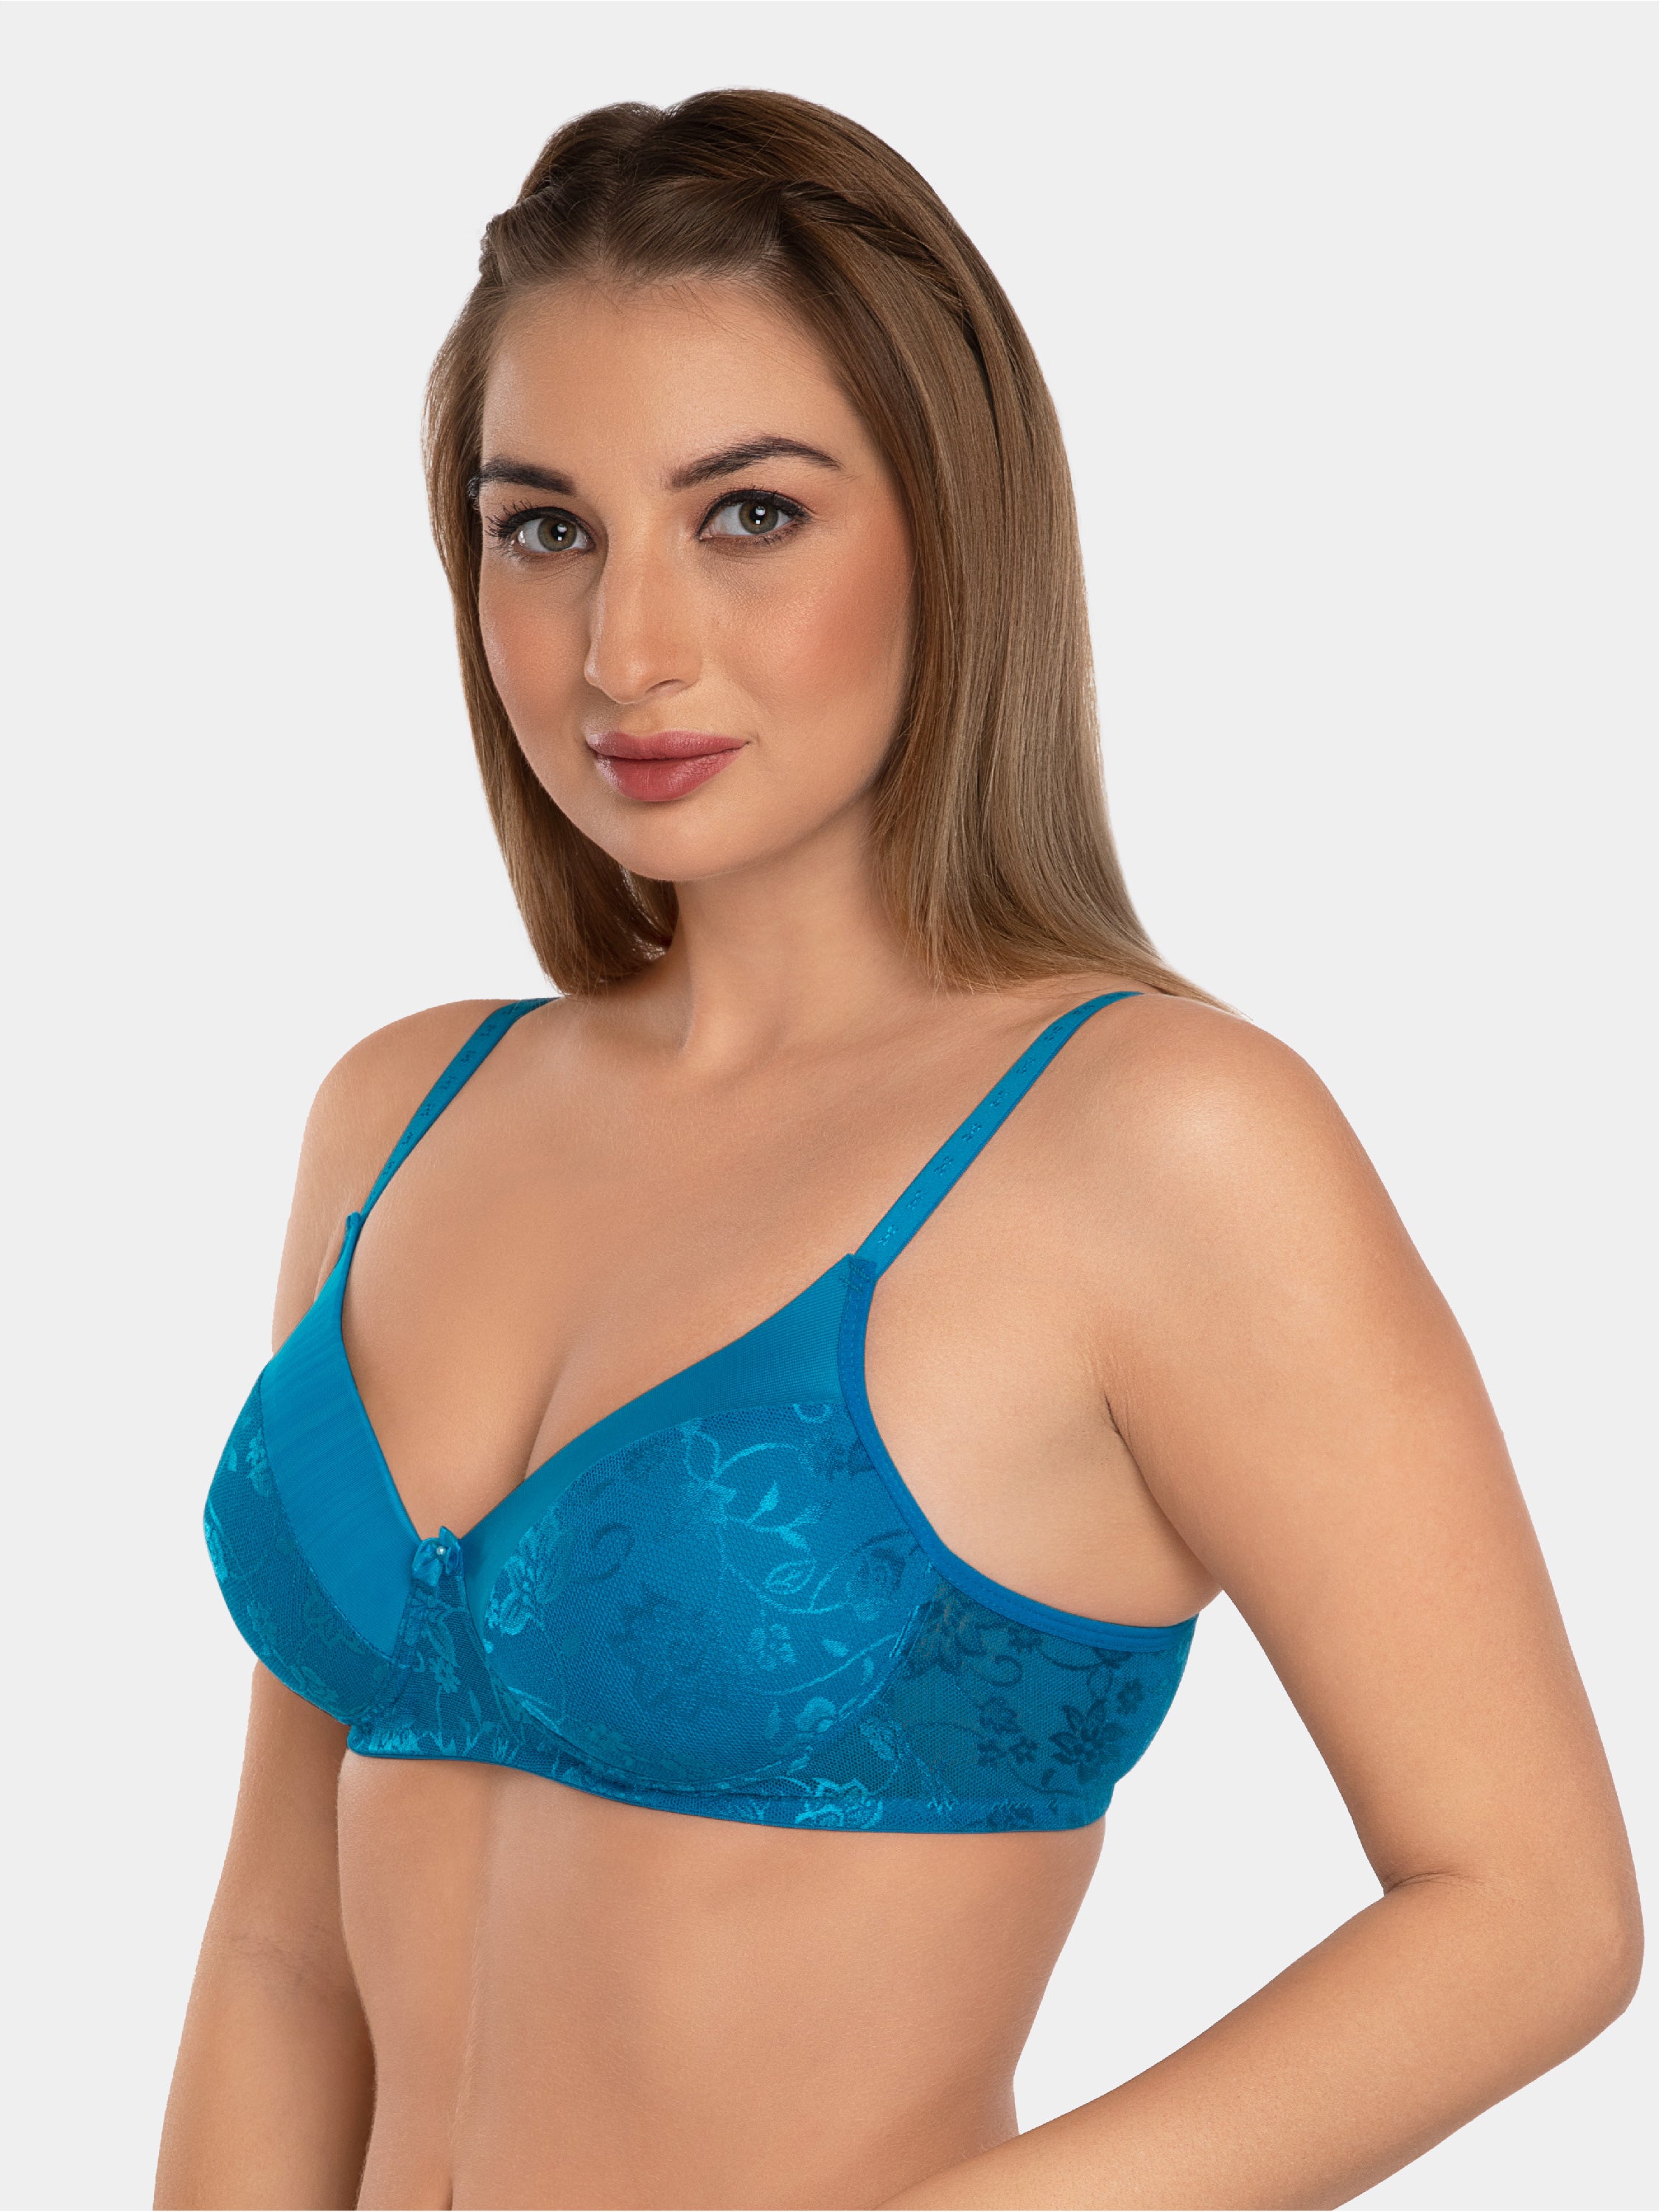 Daisy Dee Turquoise Blue Padded Non Wired Full Coverage Bra NVLR-T.Blue